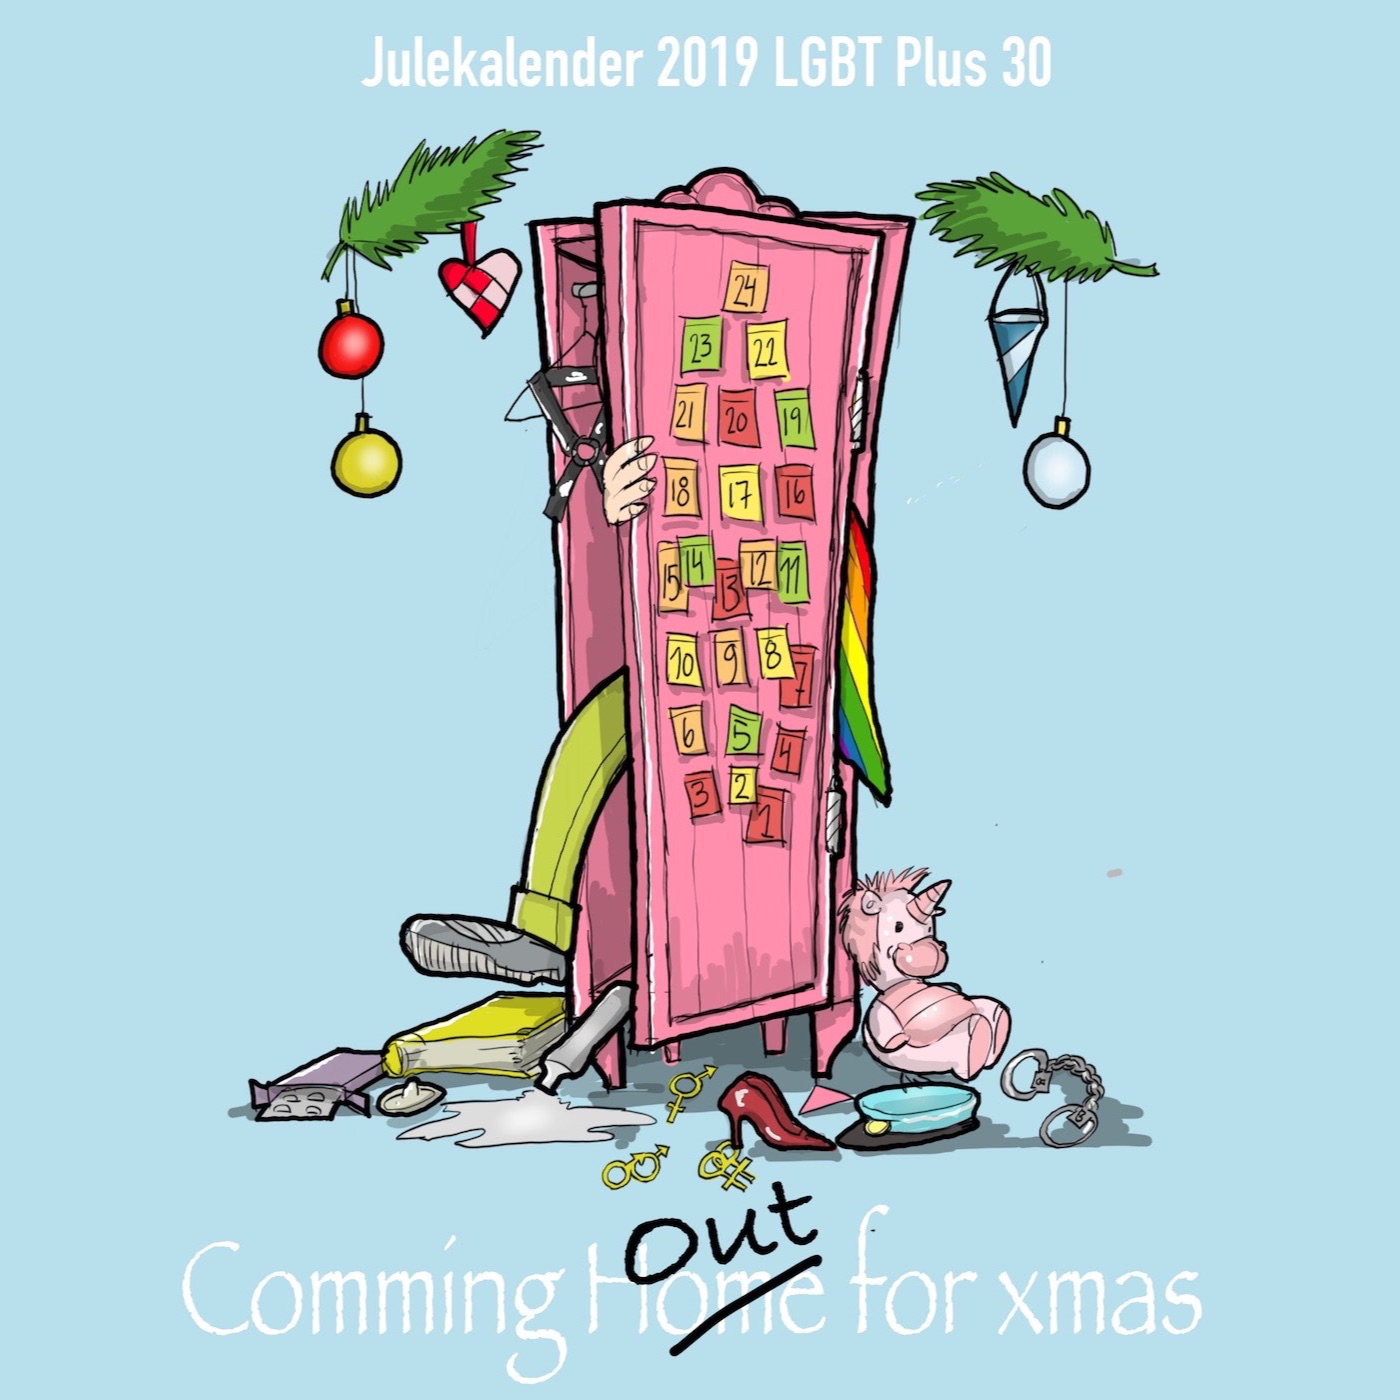 Coming Out for Christmas